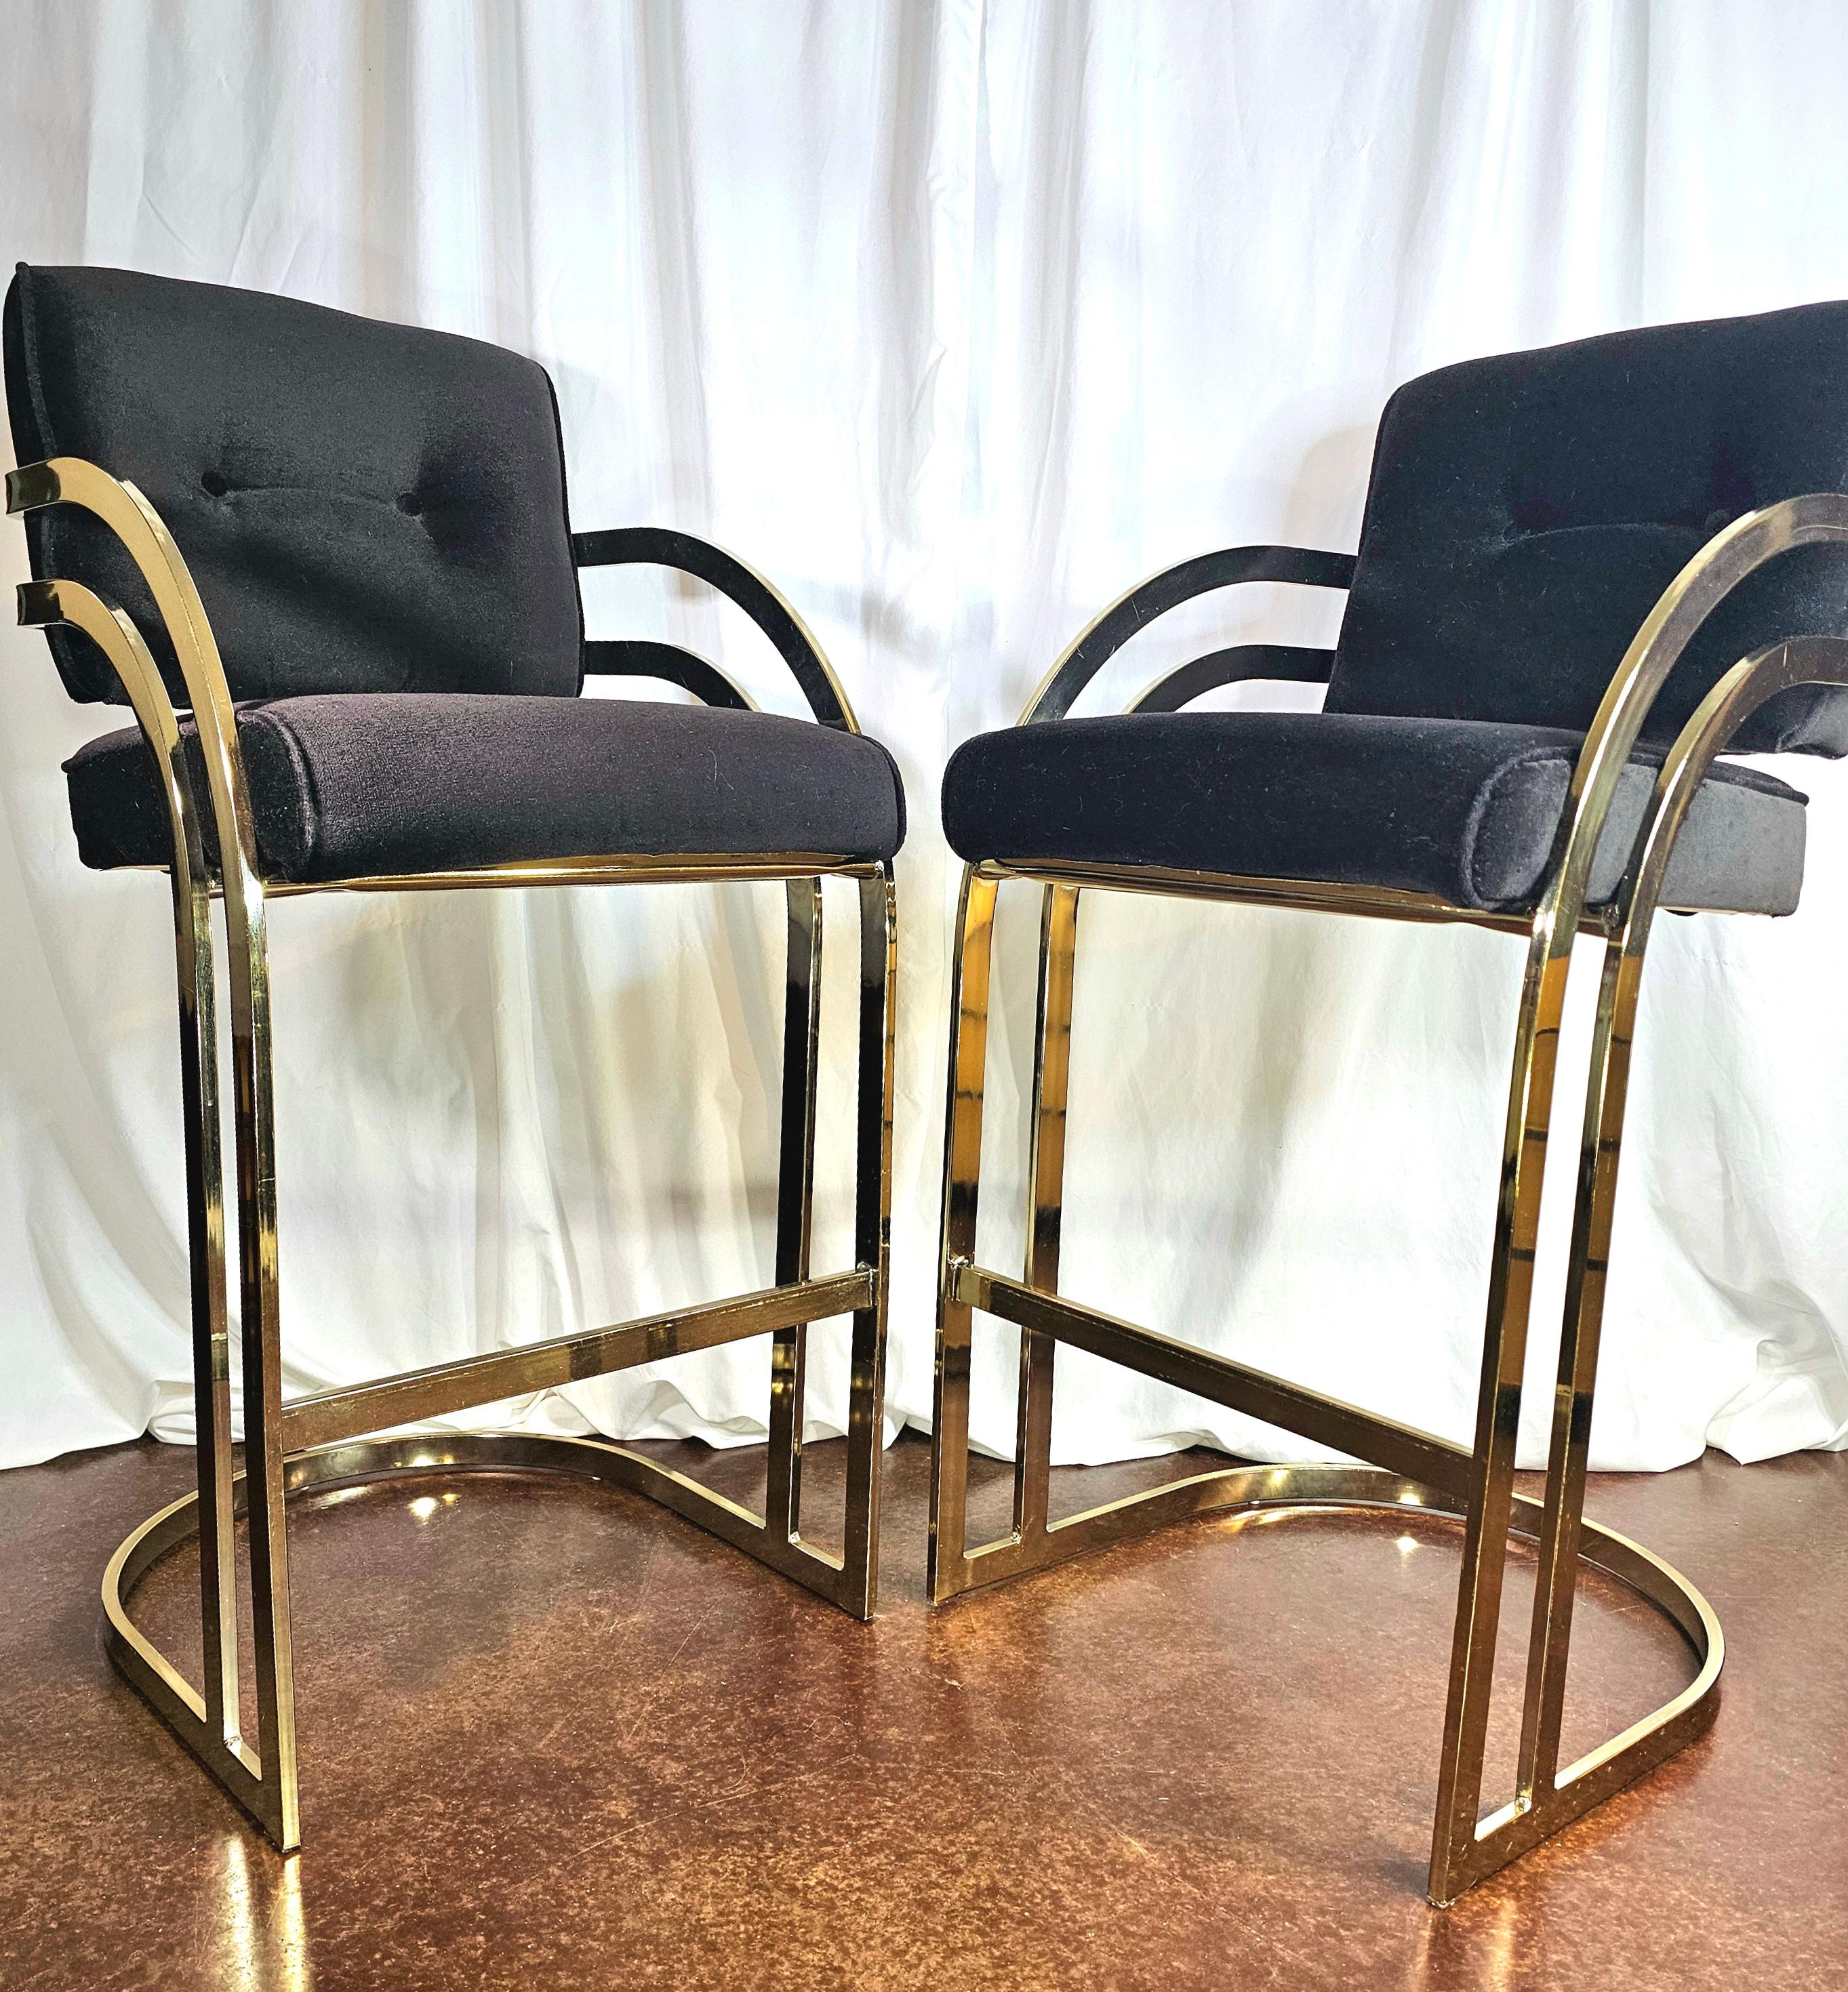 Year of birth 1975

Iconic styling for the time.
Very Milo Baughman. 
Very Saturday Night Fever. 
Vintage upholstery is in amazing shape. 

Stunning pair of vintage modern bat height barstools.
Feature a stylish cantilever brass plated frame with